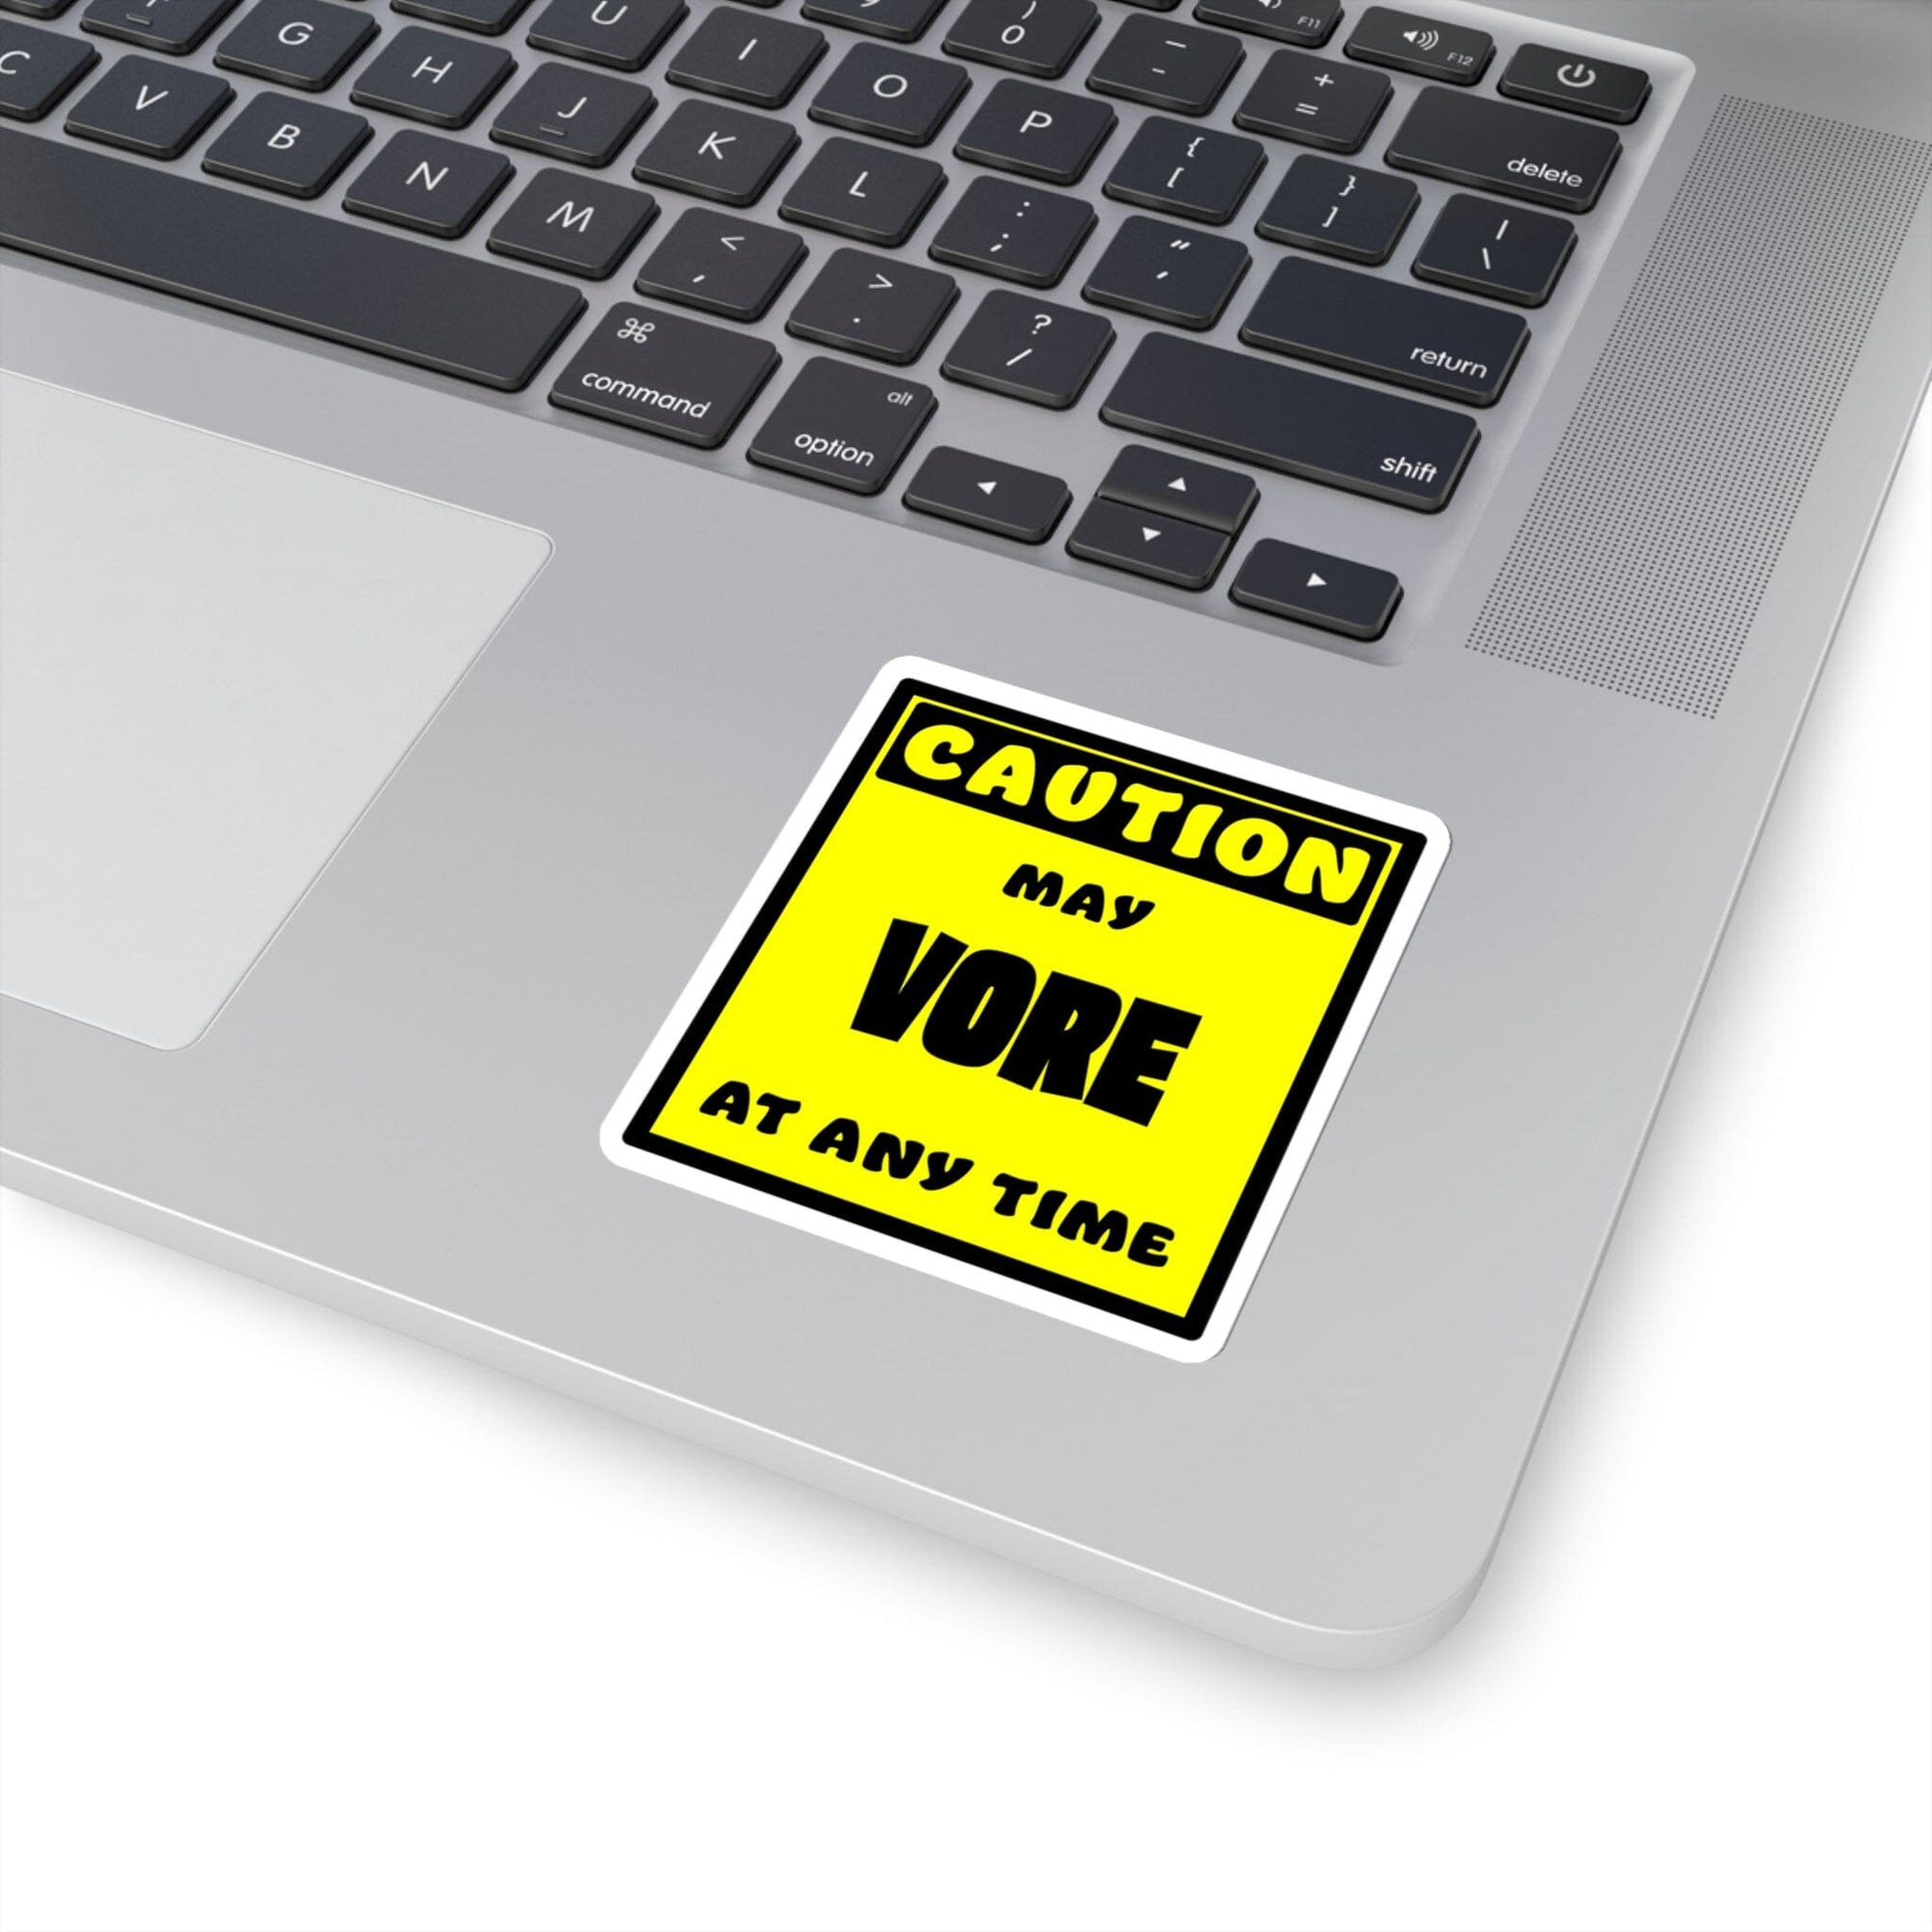 CAUTION! May VORE at any time! - Sticker Sticker AFLT-Whootorca 